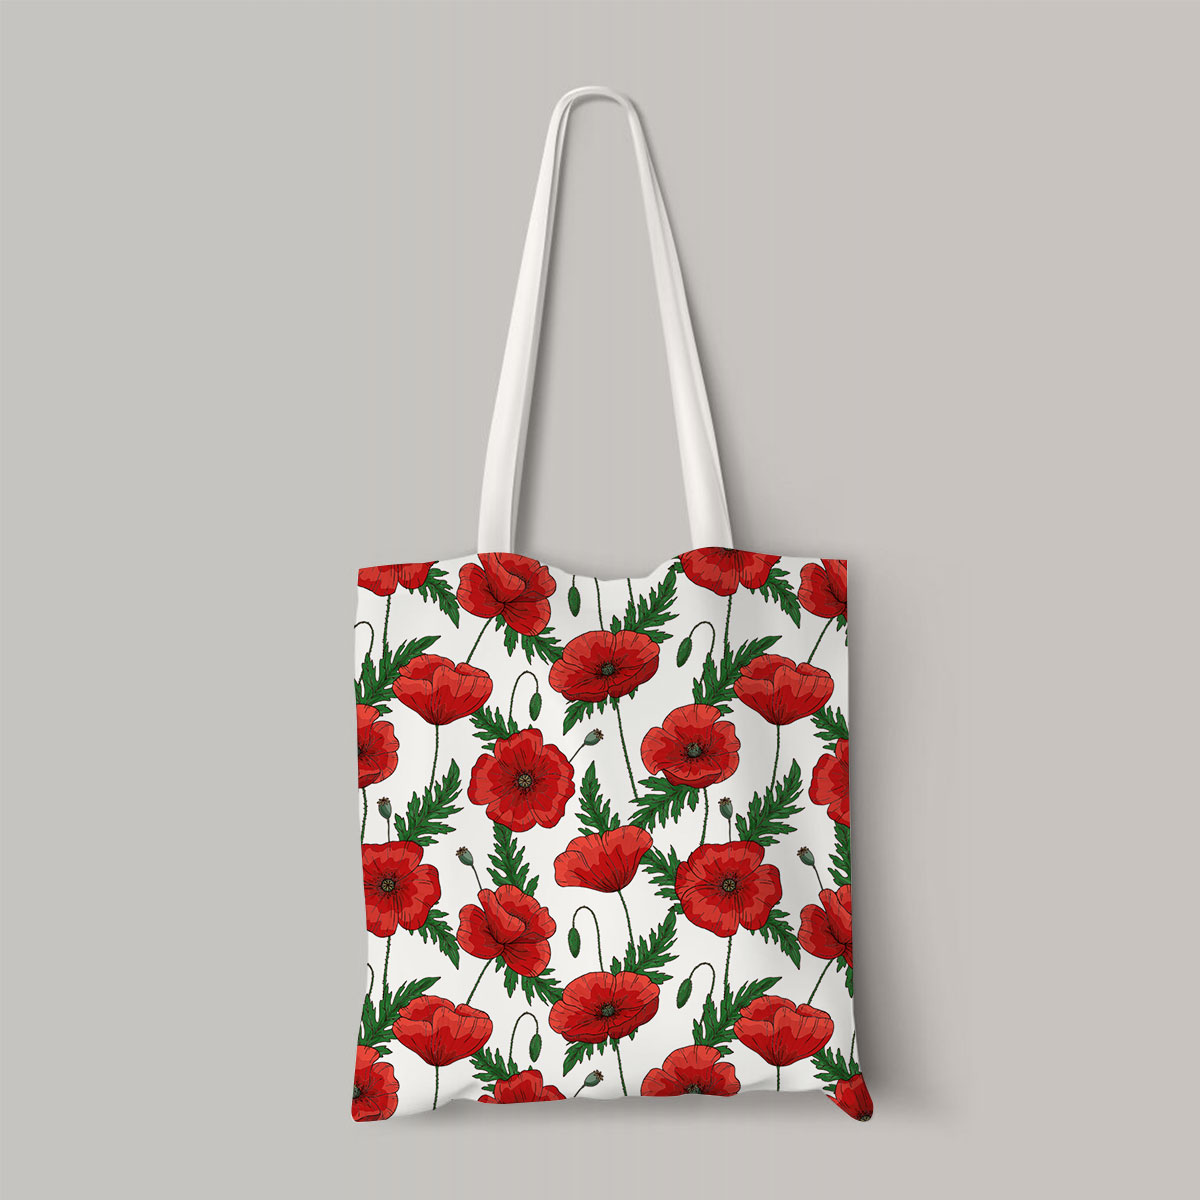 Red Poppies Flower Totebag